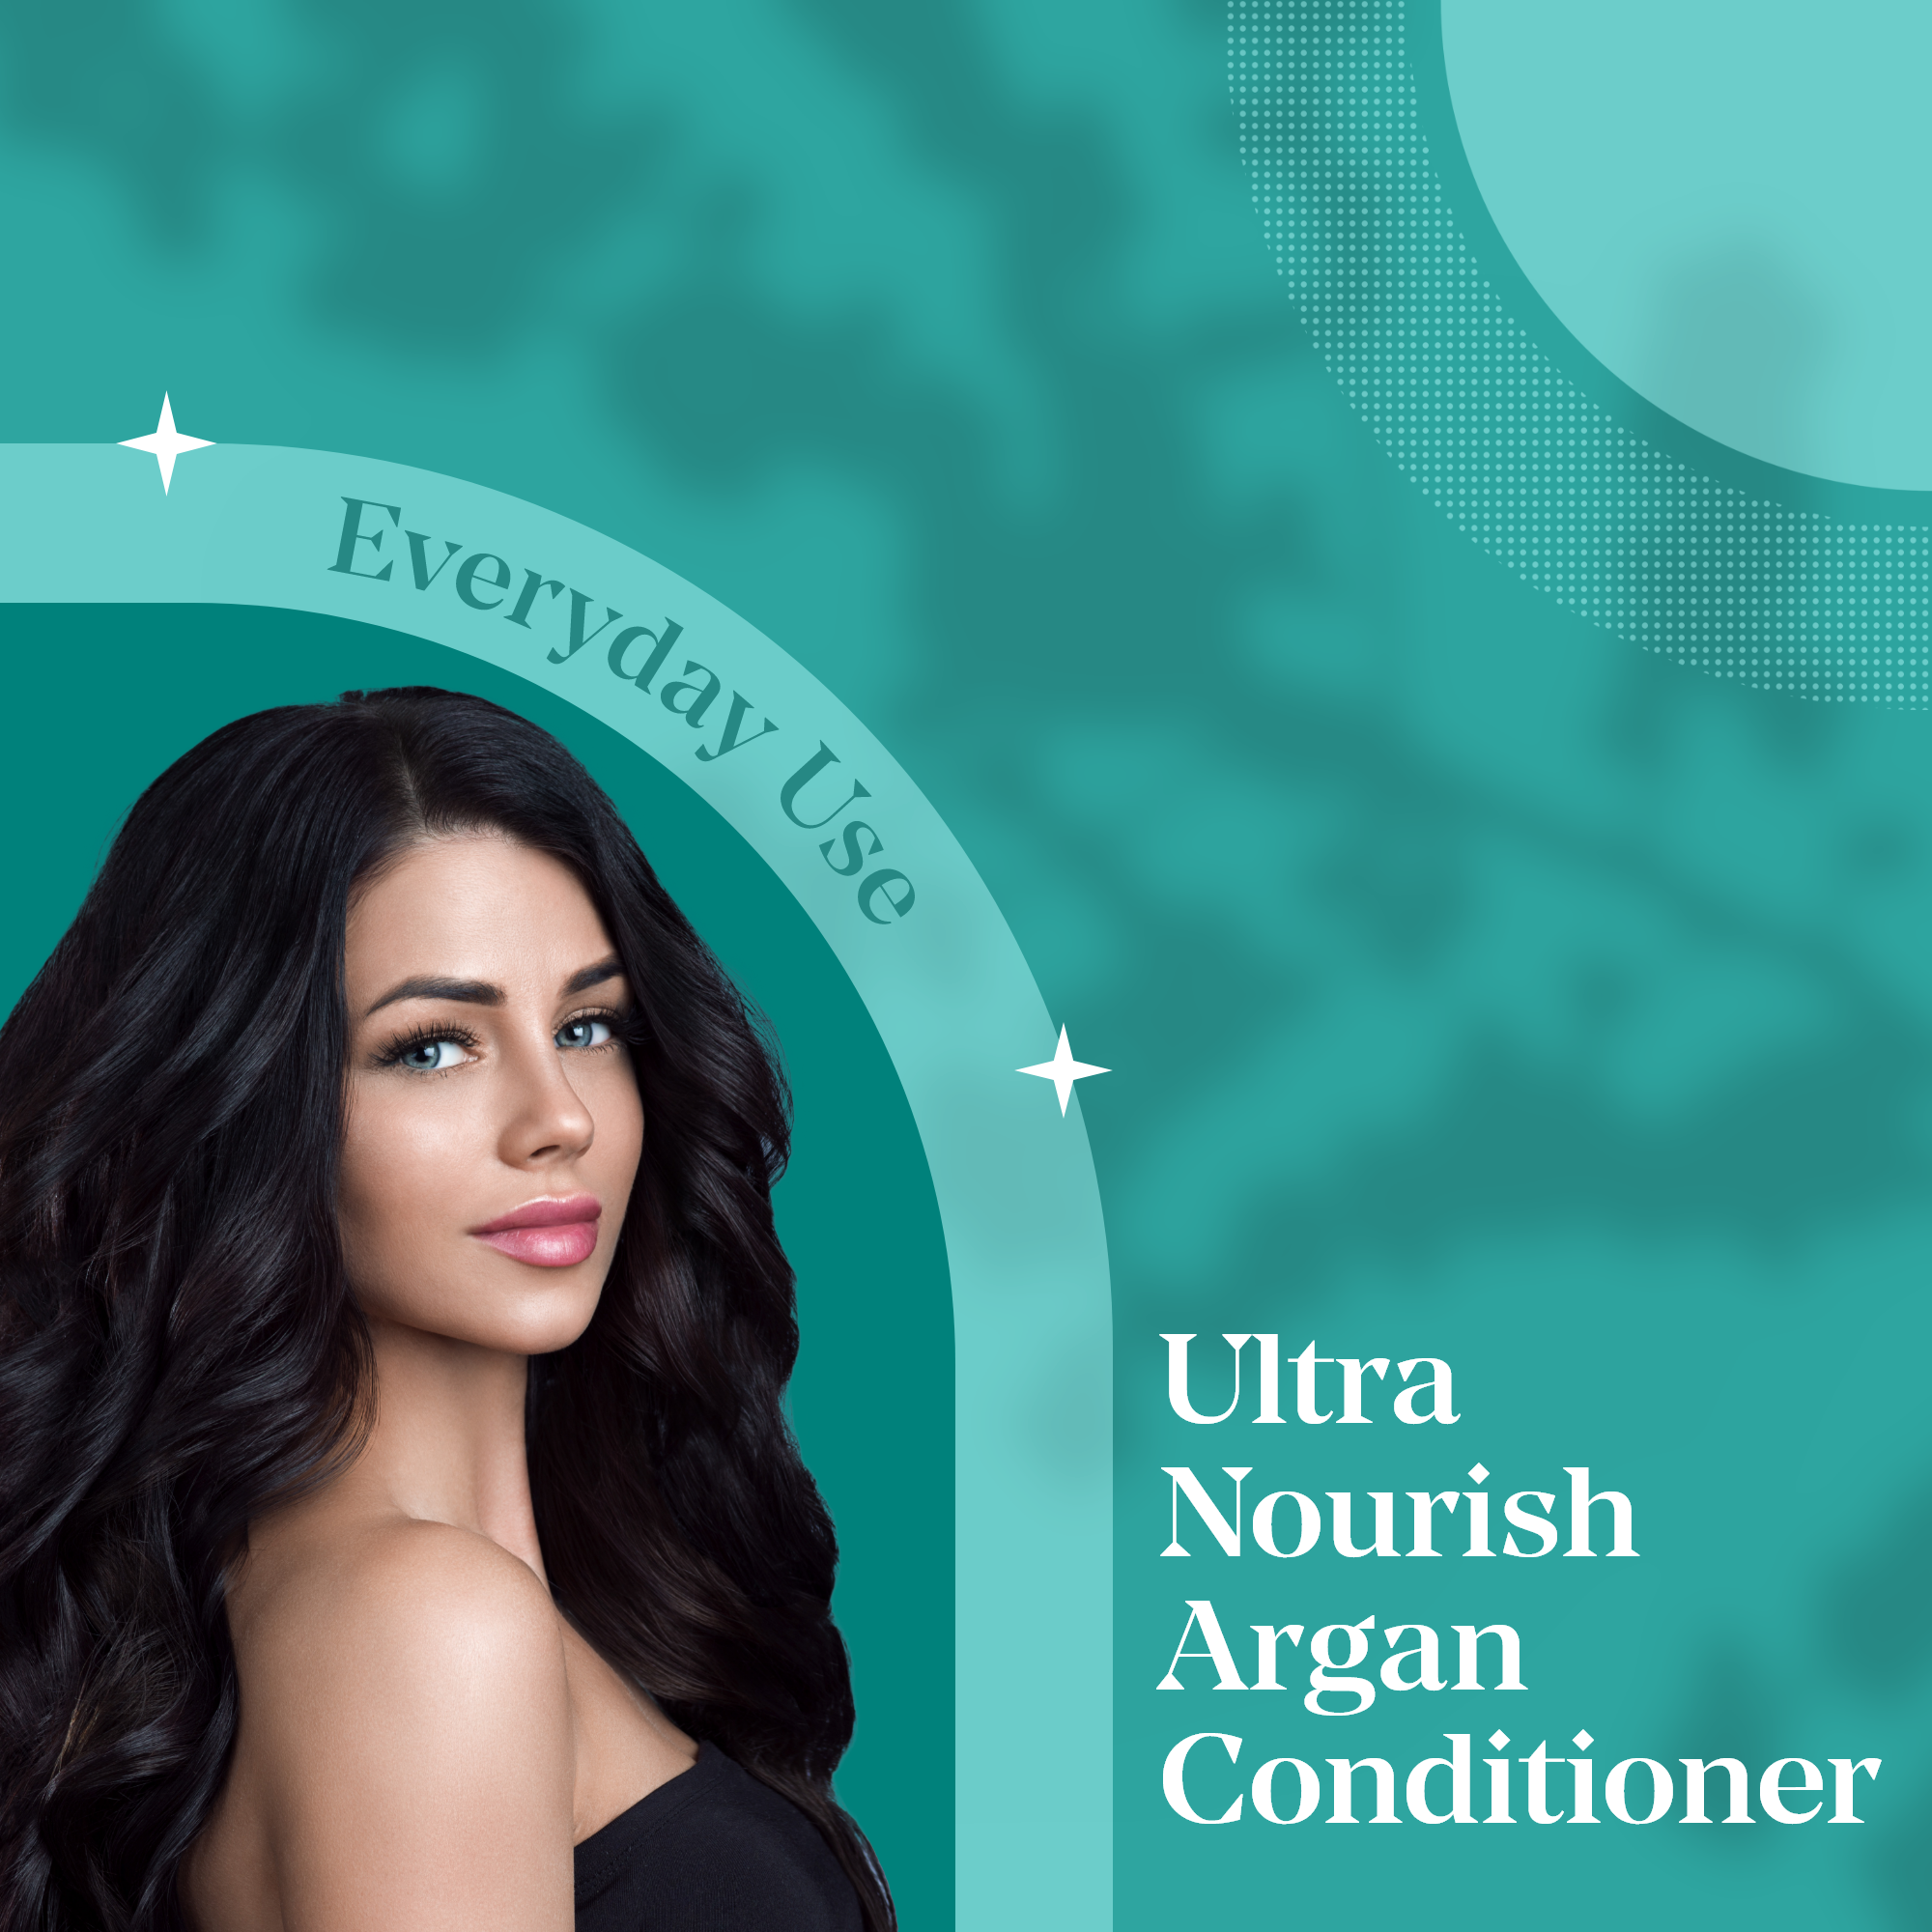 Combo Ultra Nourish Argan Conditioner & Facewash exfoliating cleanser with cherry and strawberry extrack